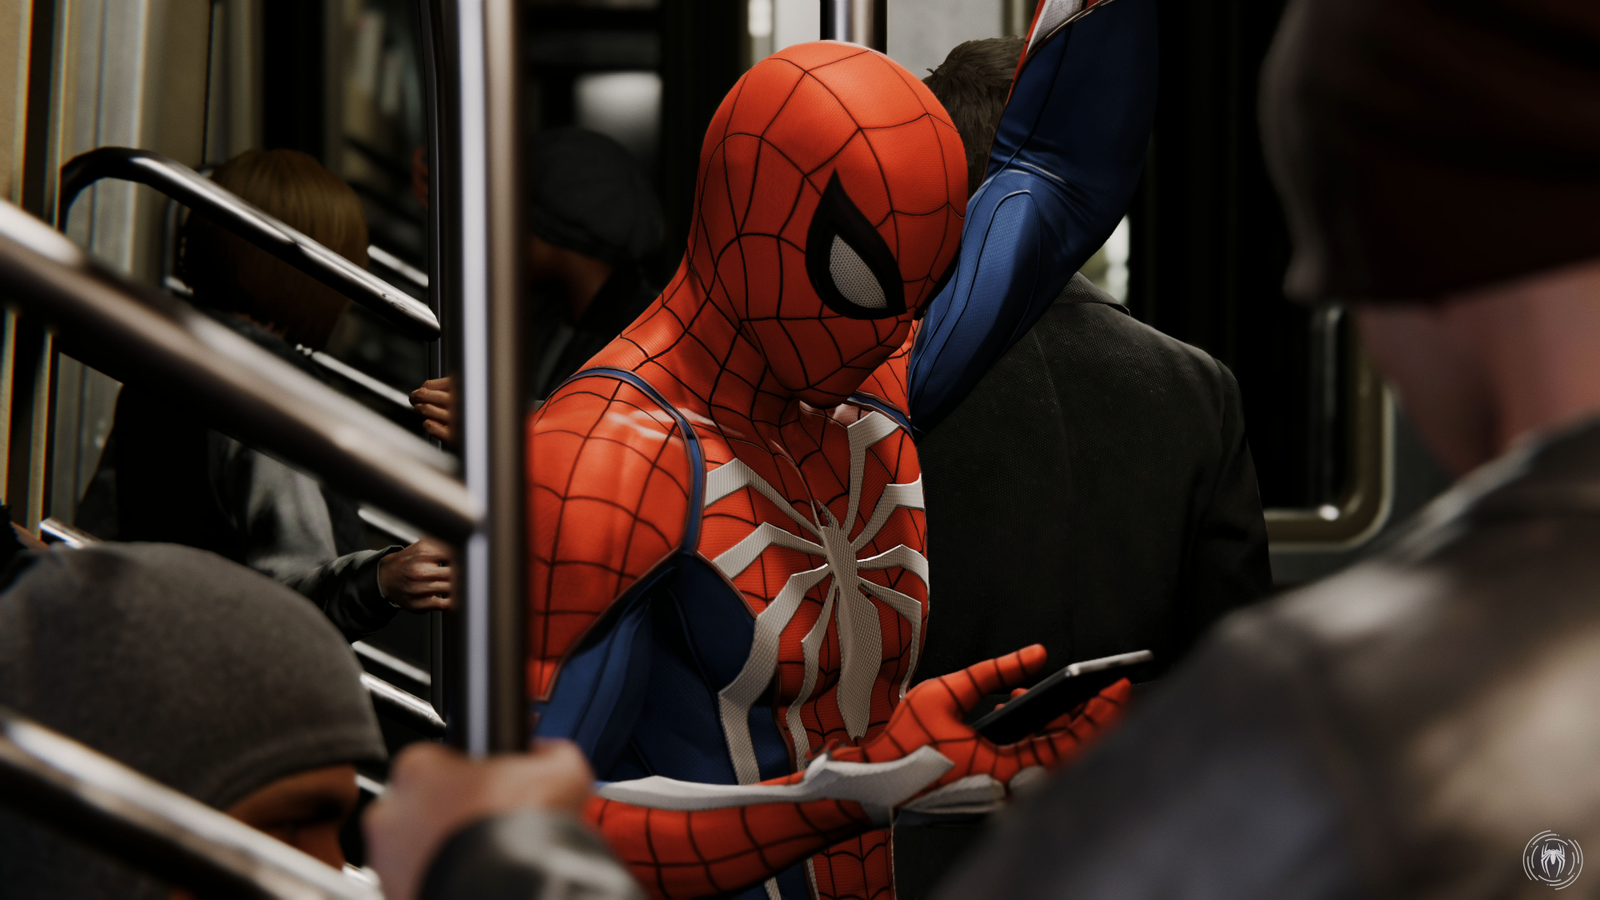 Spider-Man PS4: tips and tricks for your mission to save Manhattan | VG247